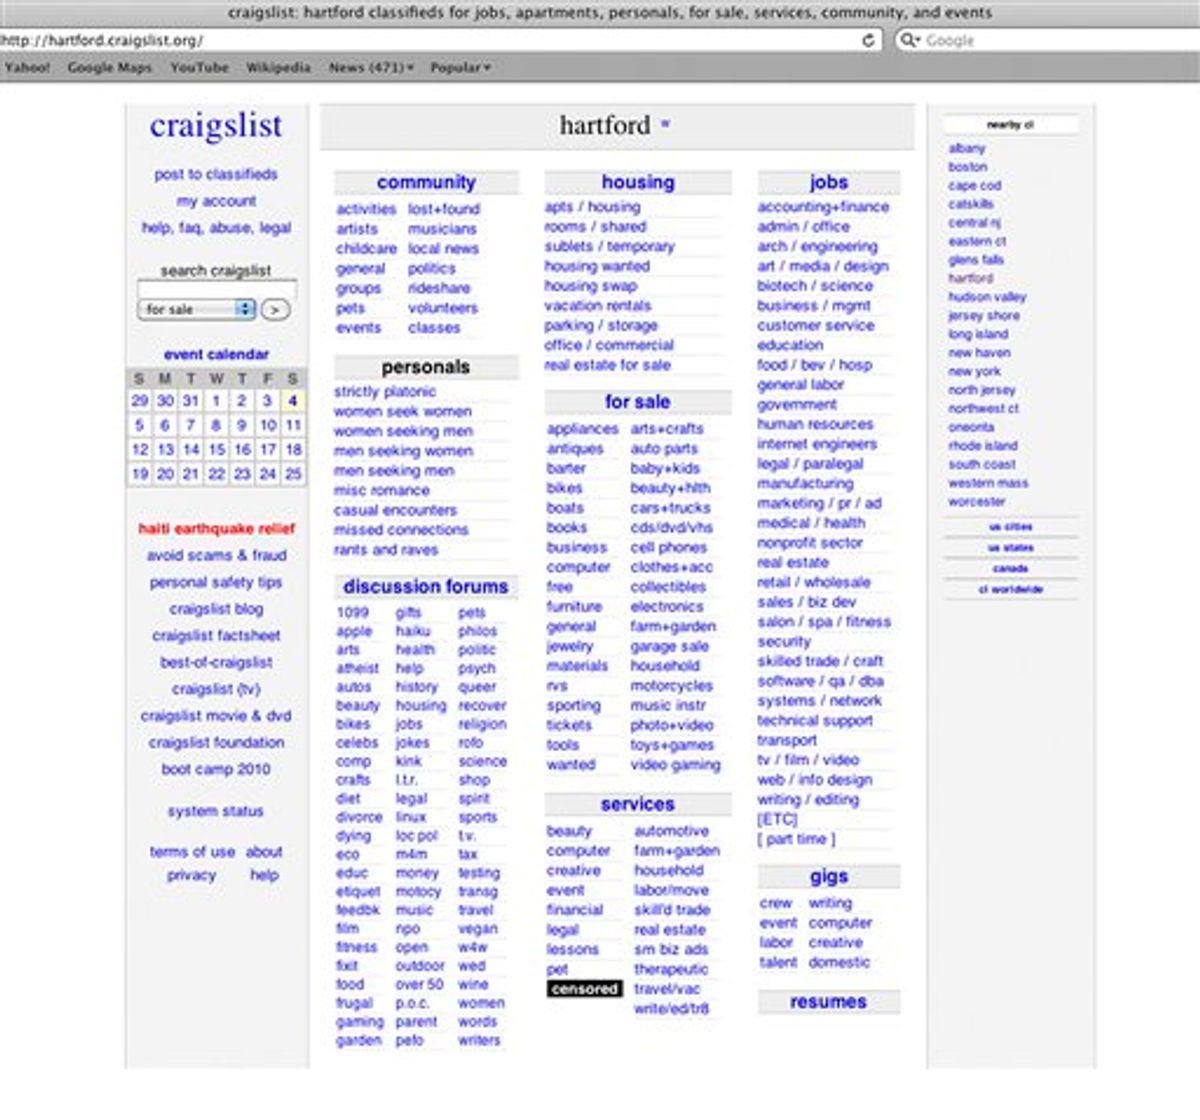 This screen shot made on Saturday, Sept. 4, 2010 shows the opening page of Craigslist's website for Hartford, Conn., featuring a "censored" logo over what used to be the adult services section. Craigslist apparently closed the section two weeks after 17 state attorneys general demanded it be shut down. Connecticut Attorney General Richard Blumenthal, one of the AGs who pressed for the change, said in a written statement that he welcomed the change and was trying to verify Craigslist's official policy going forward. (AP Photo/Craigslist) NO SALES    (AP)